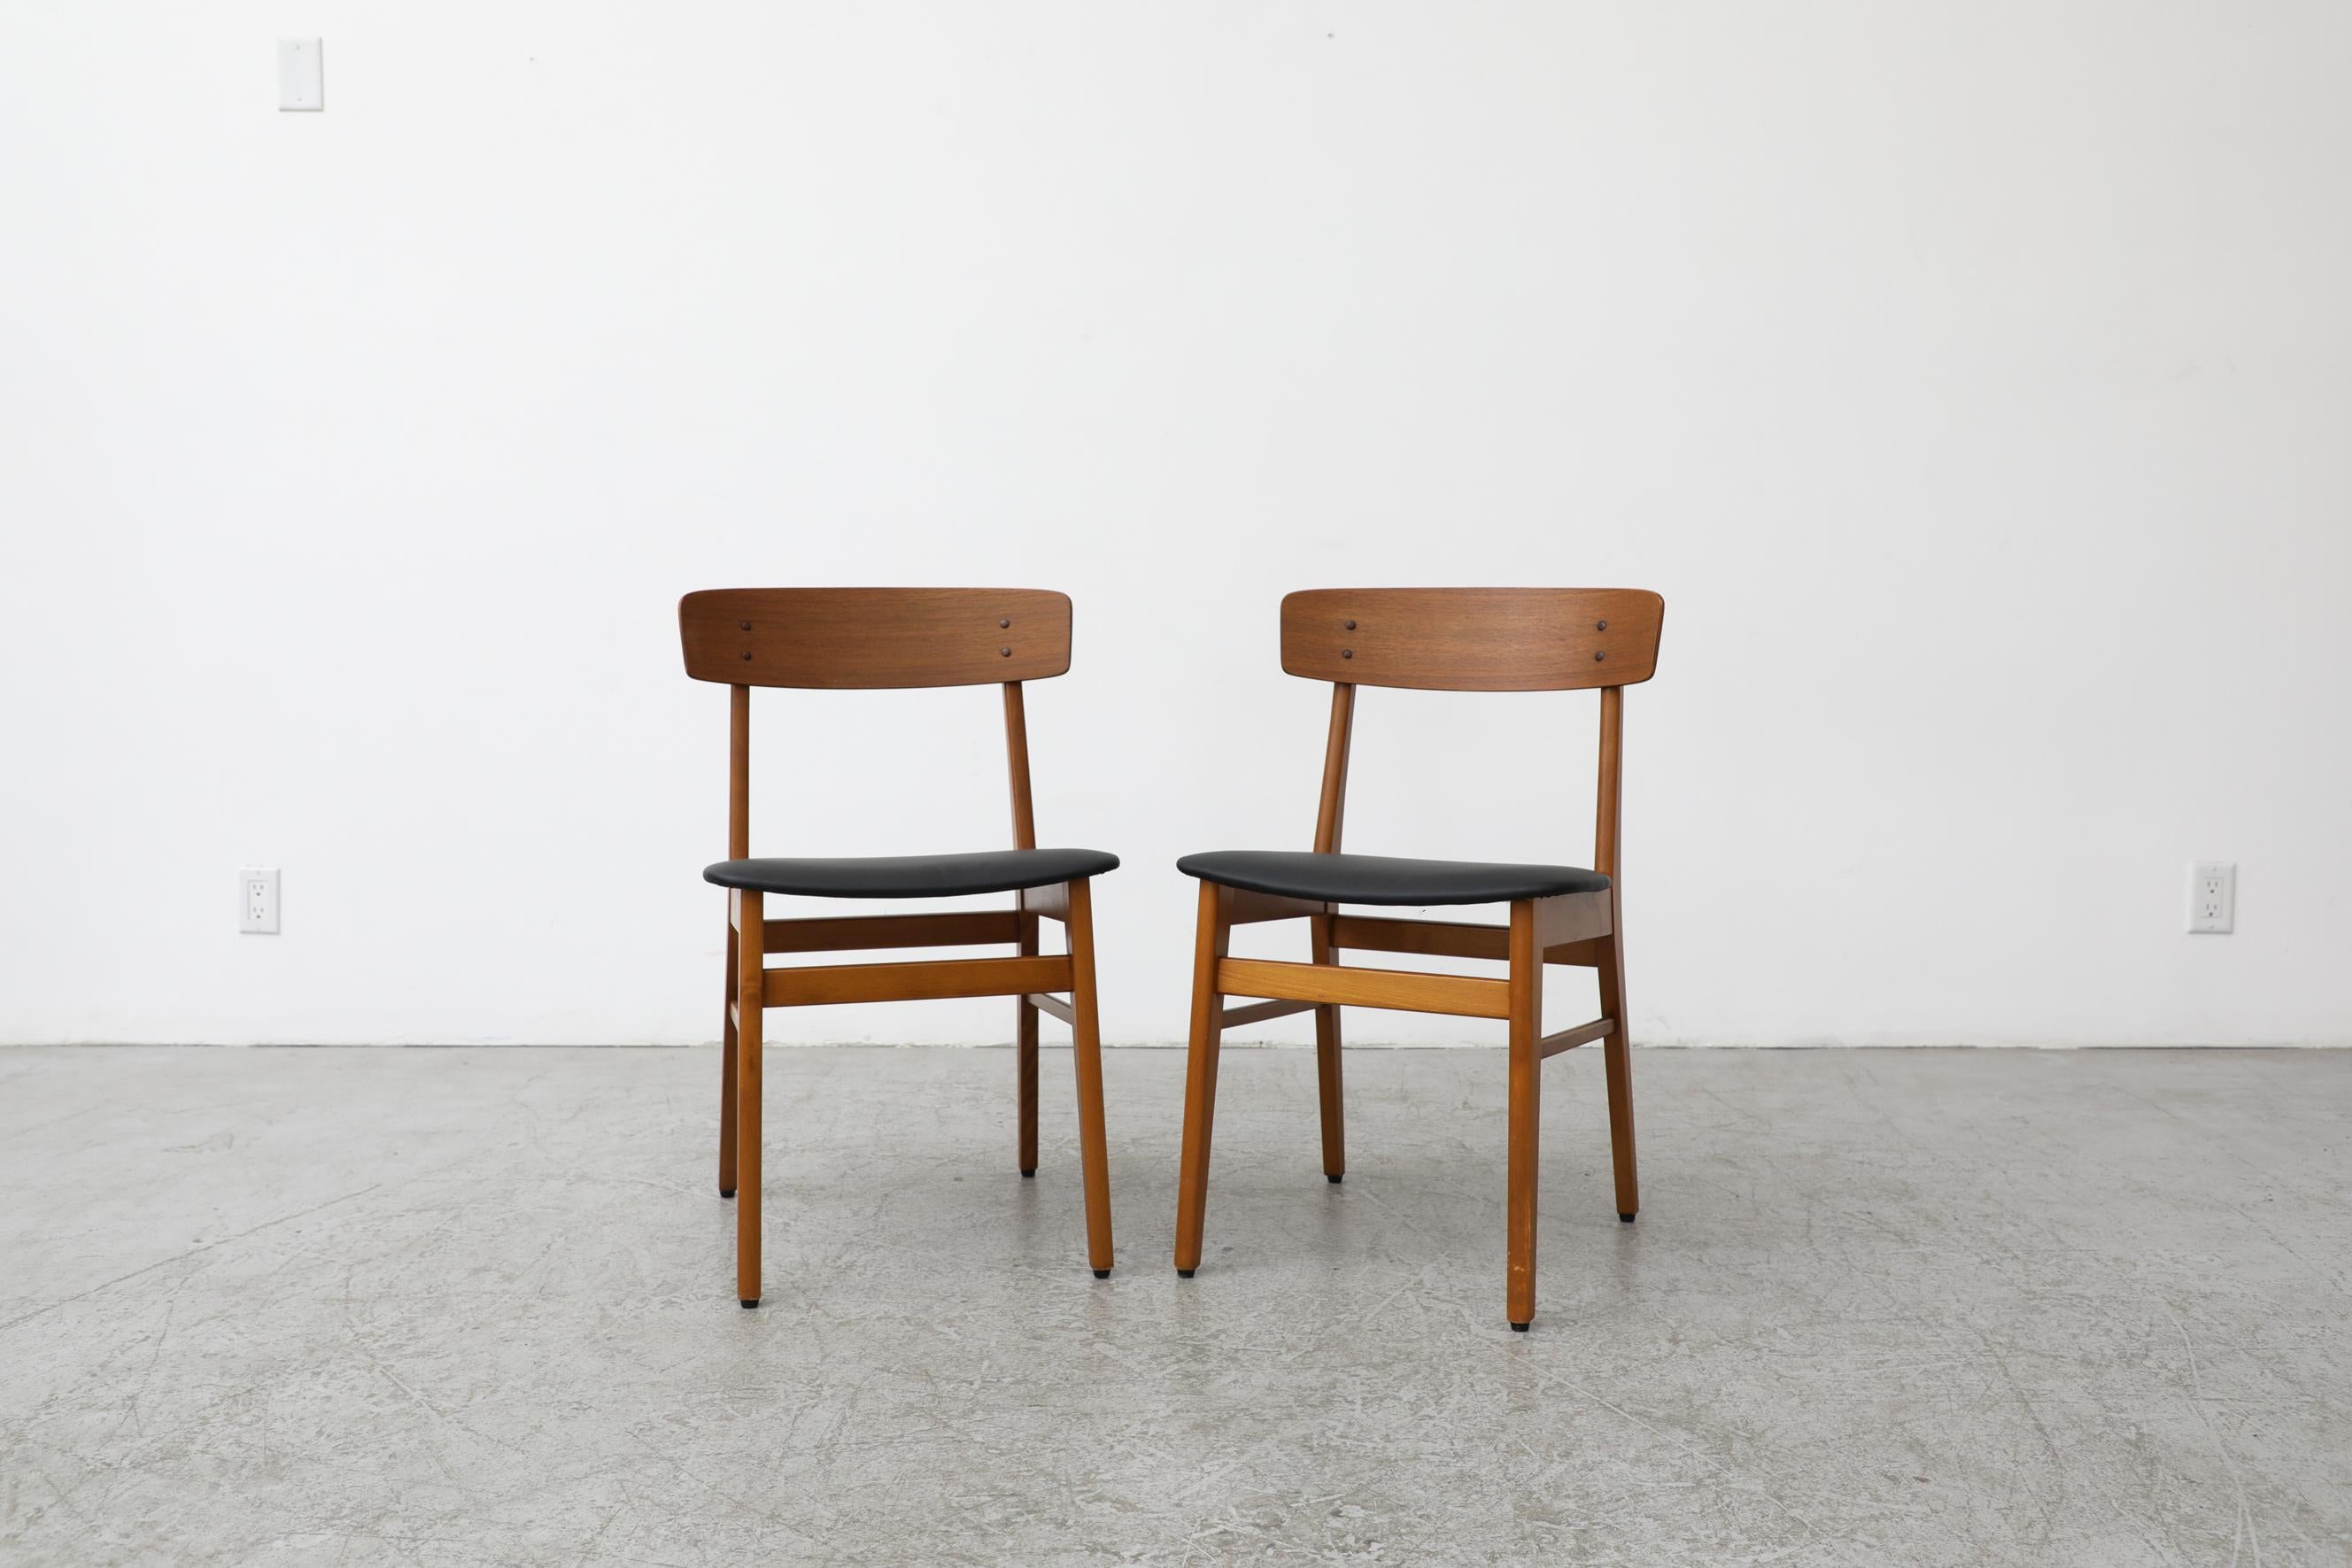 Pair of Borge Mogensen style chairs by Farstrup with black skai seats. In the 1950s and 60s, Farstrup's production of chairs expanded significantly making it one of the more well known and defining Danish brands of the era. The company has since